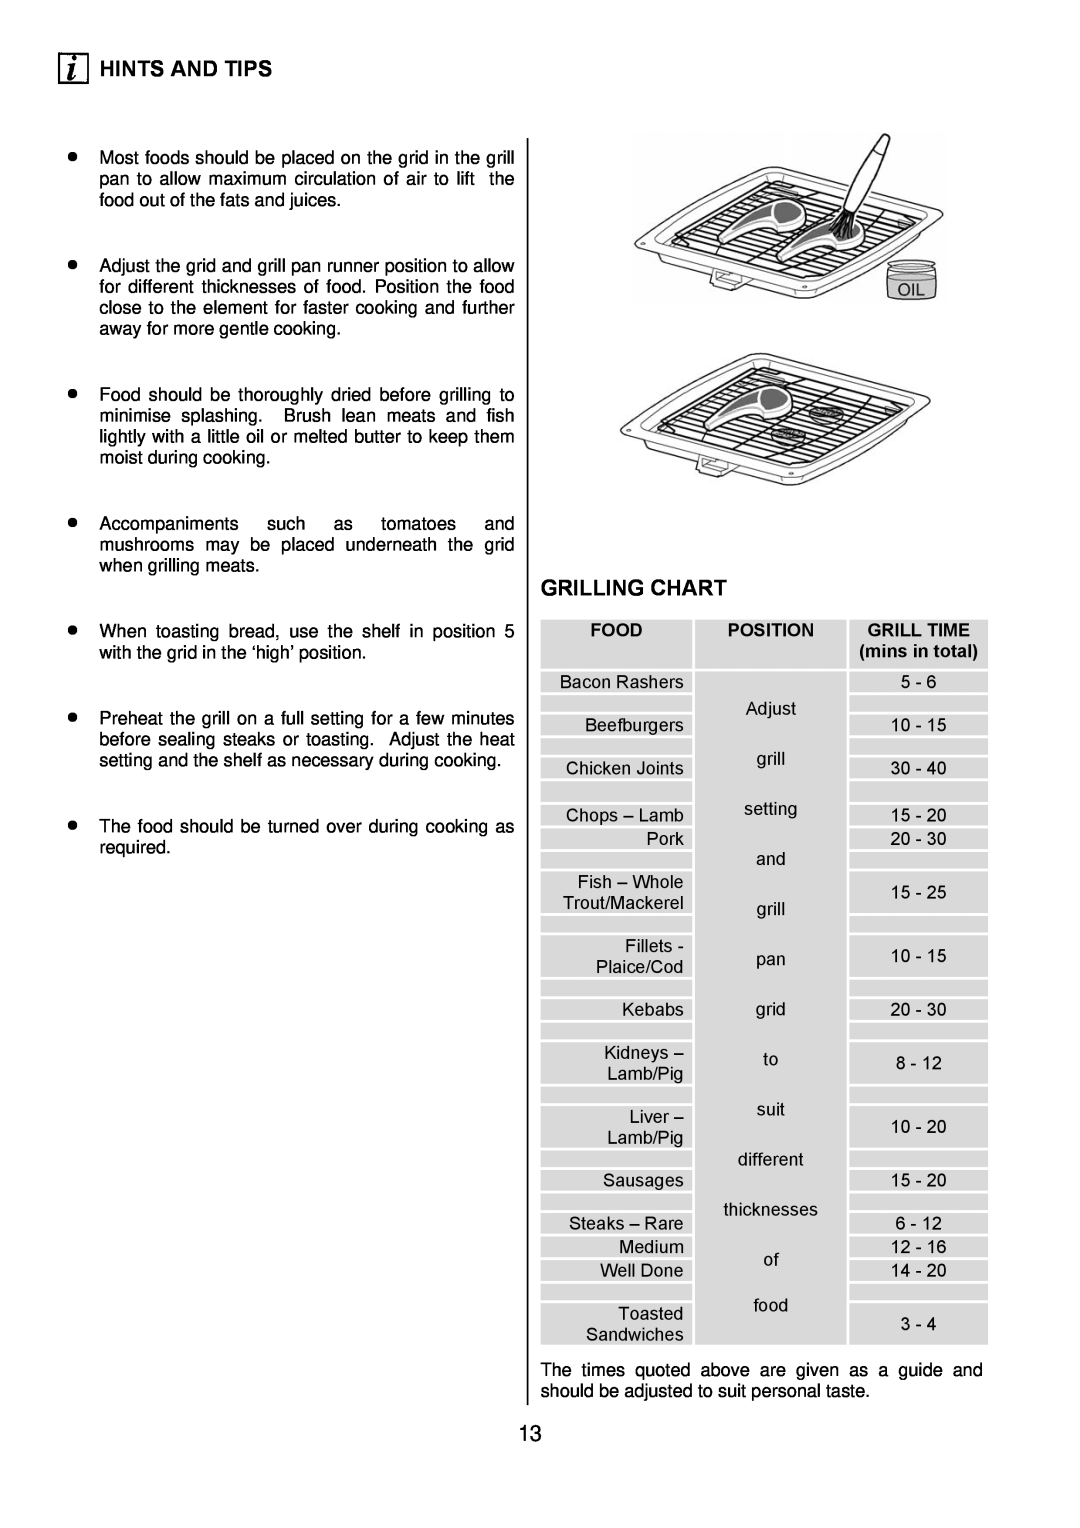 Electrolux D77000GF operating instructions Grilling Chart, Food, Position, GRILL TIME mins in total, Hints And Tips 